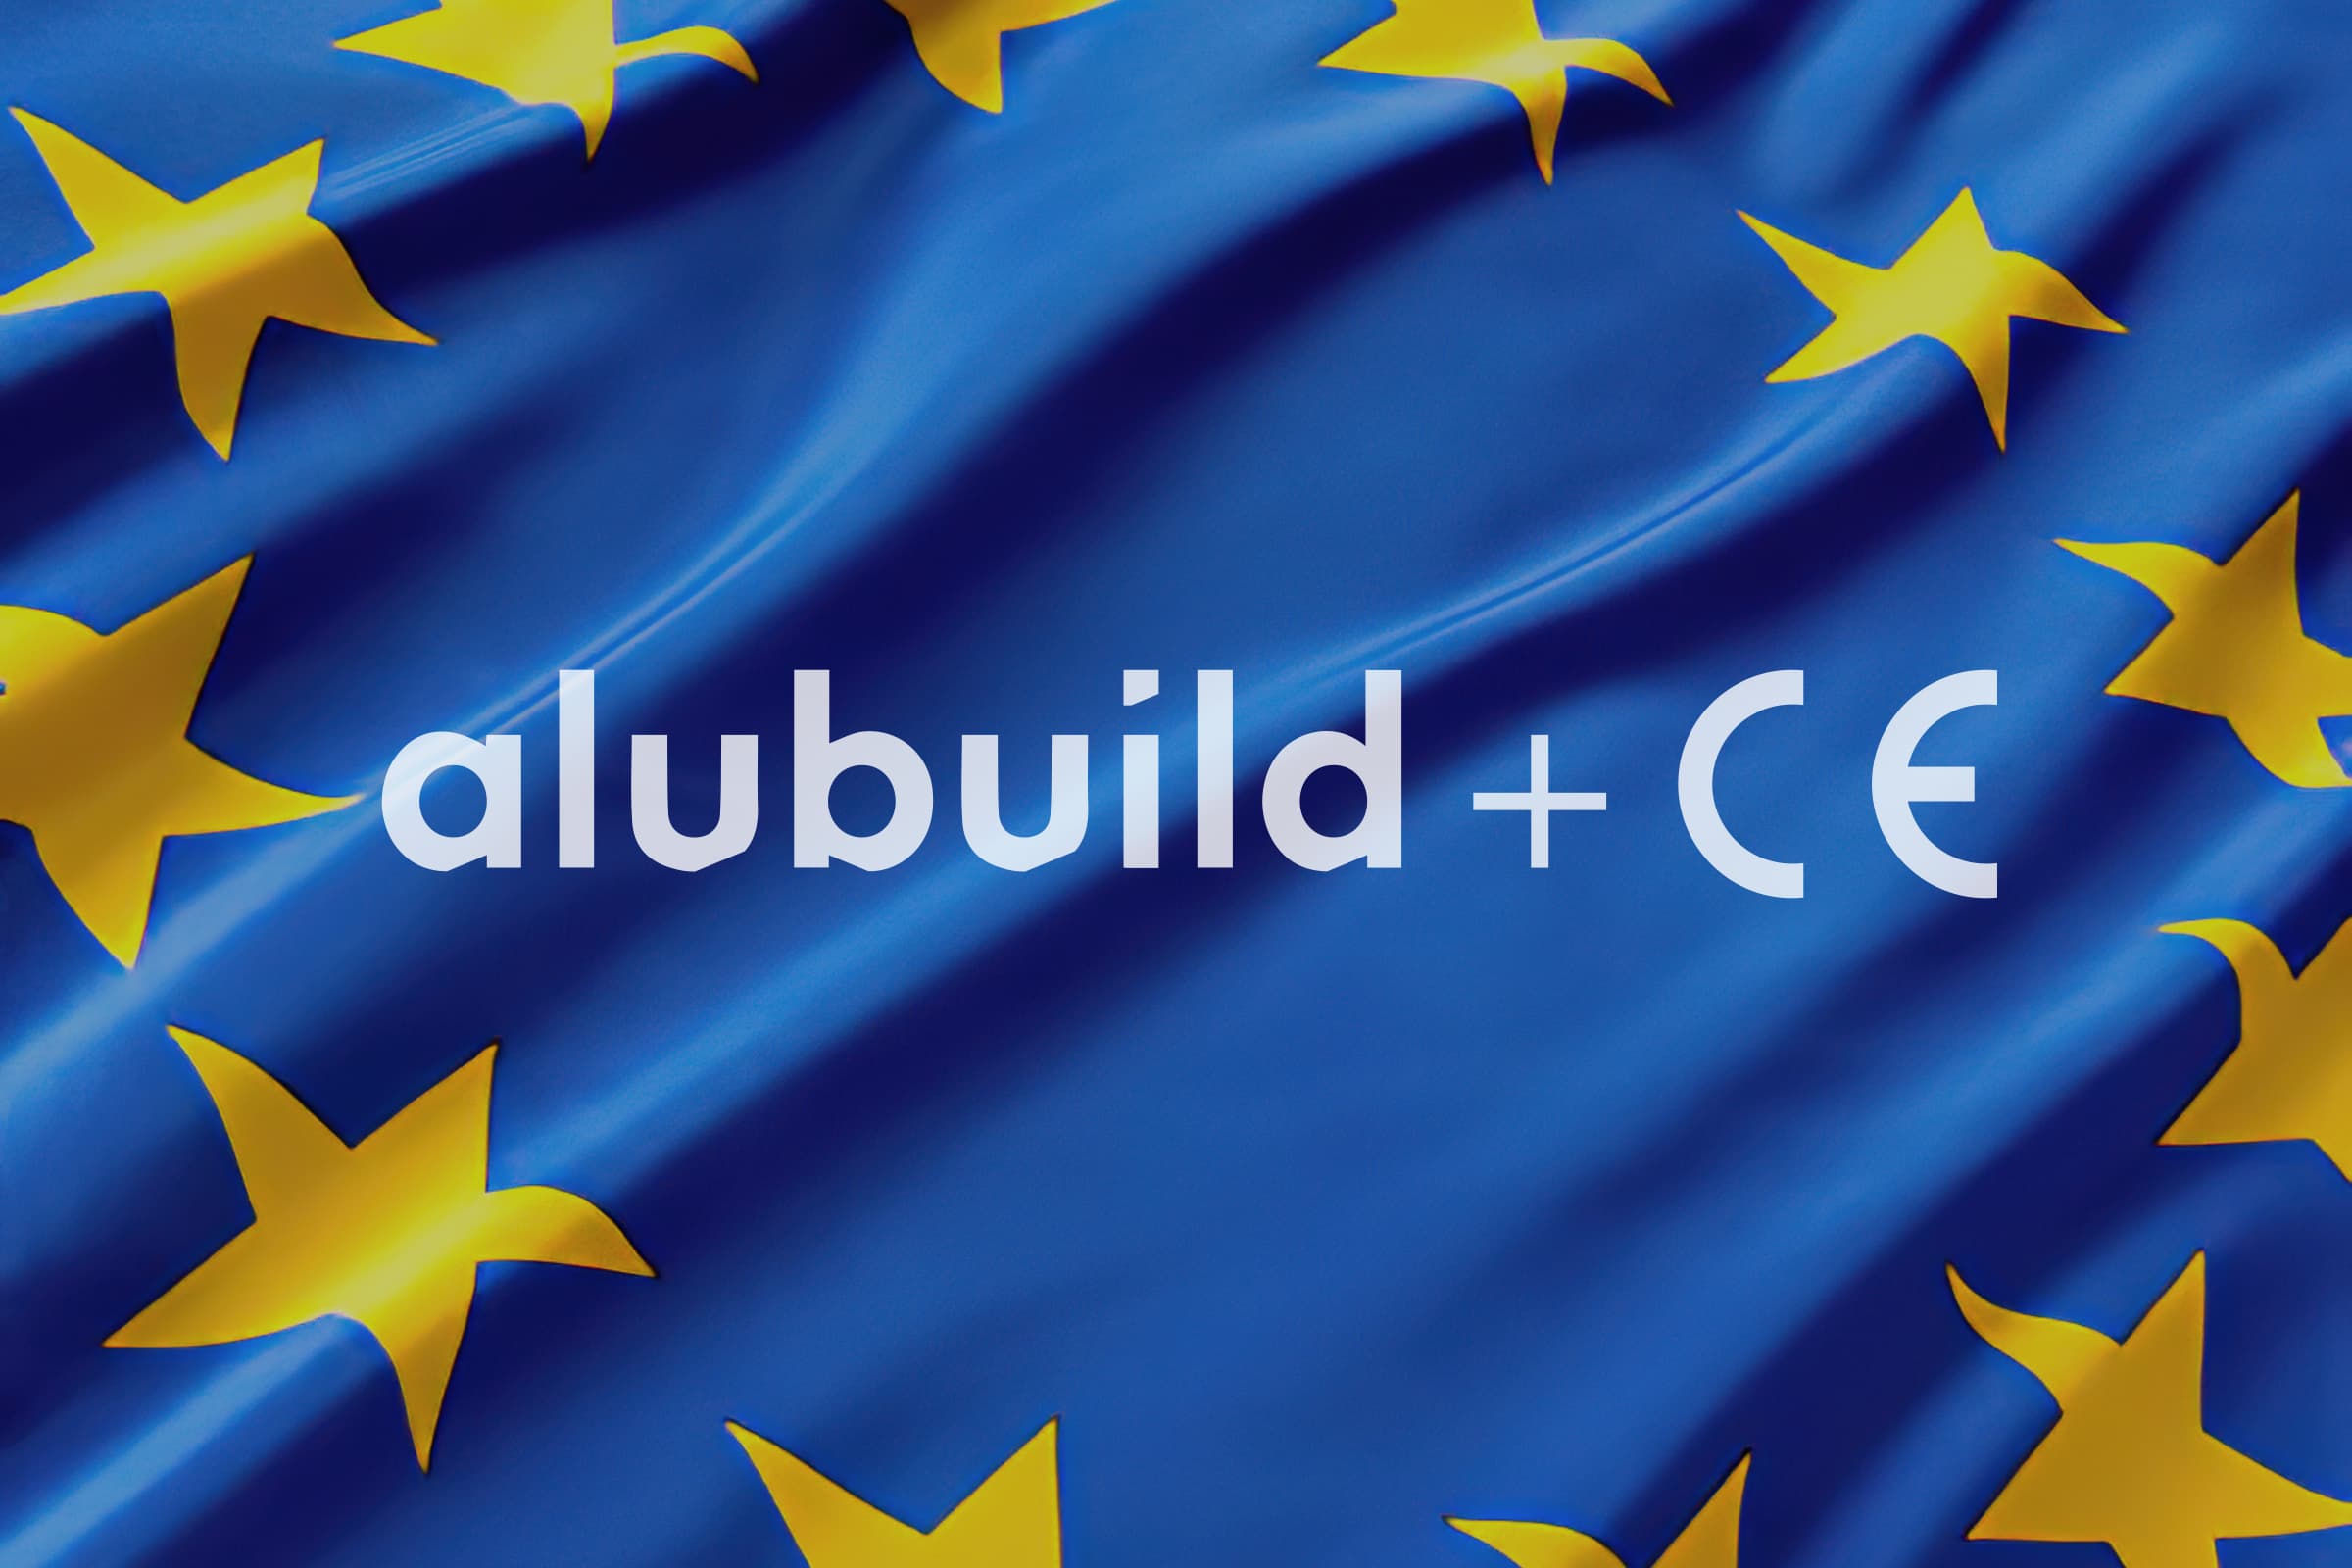 At Alubuild we have obtained CE marking on our aluminium composite panel.